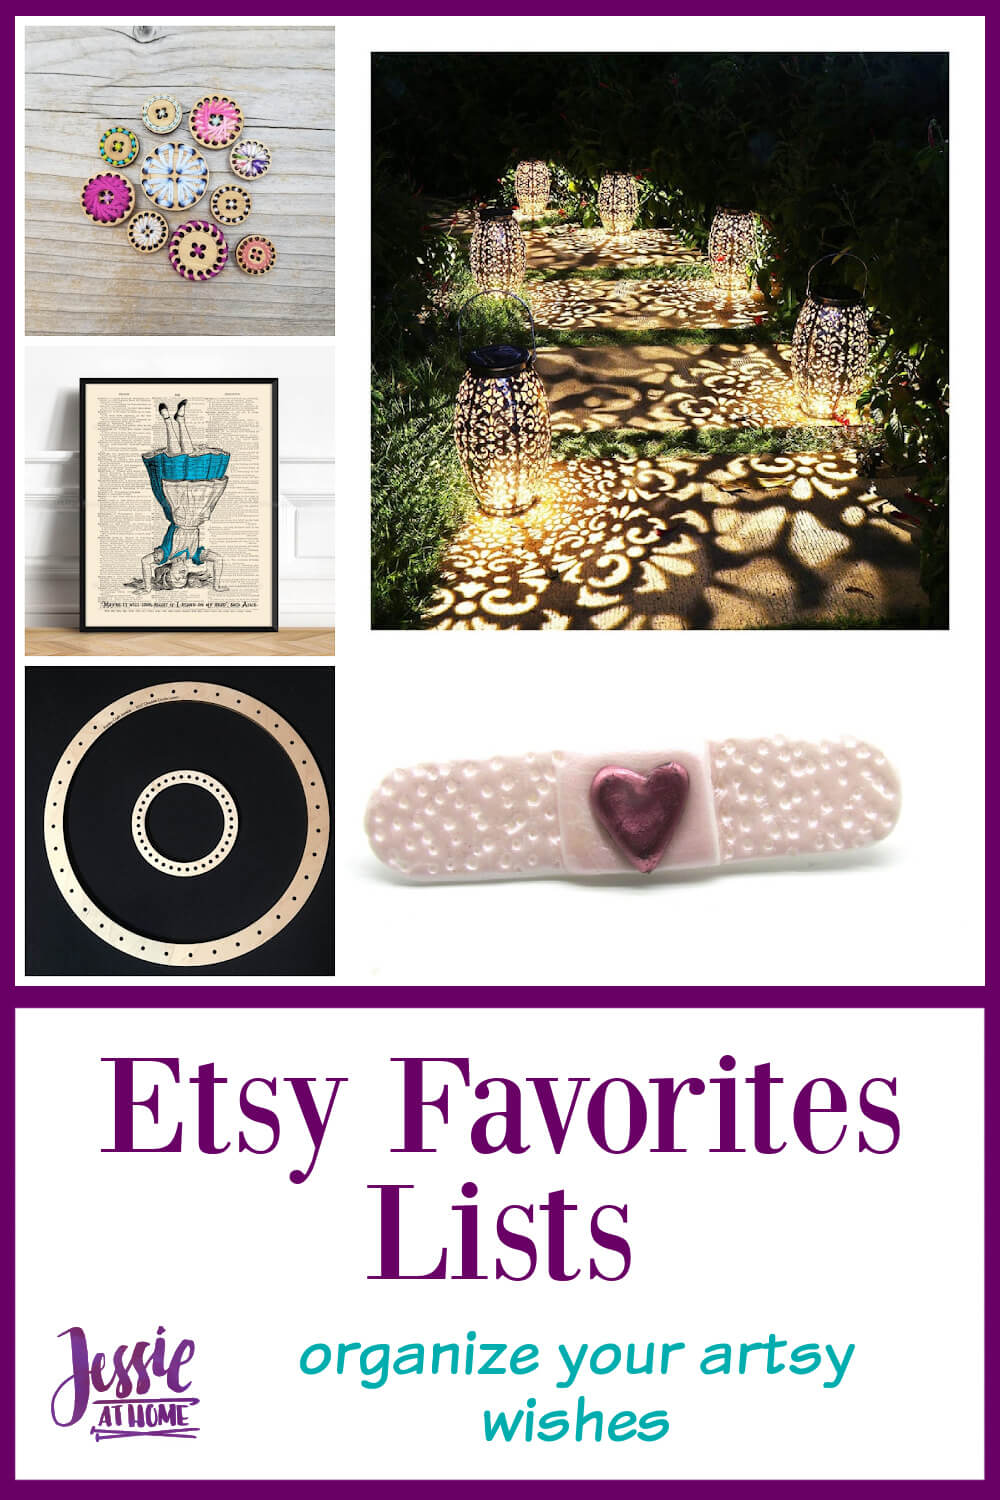 Etsy Favorites Lists - organize your artsy wishes